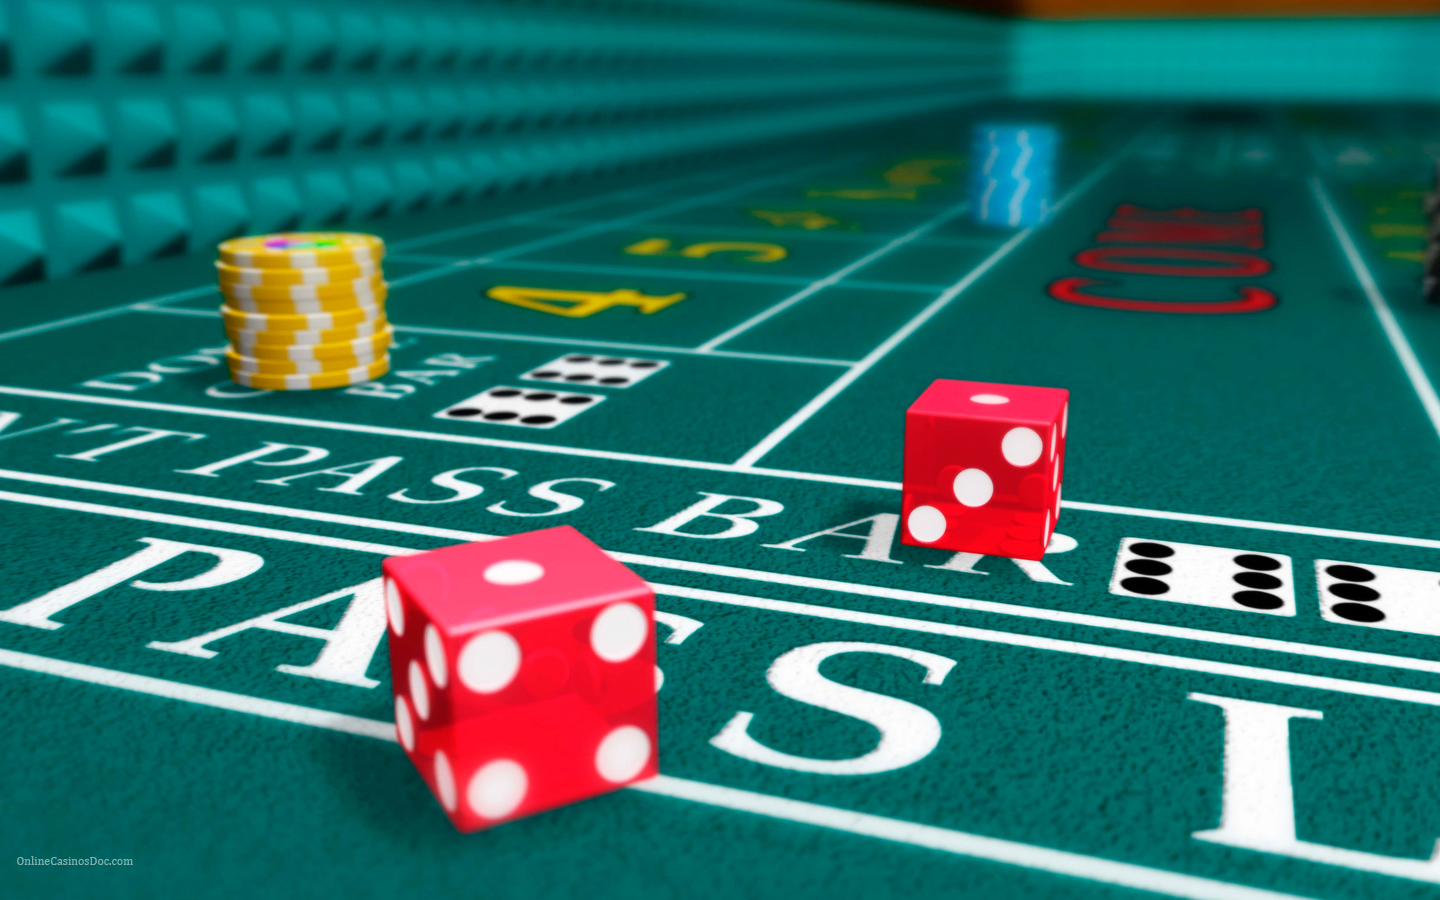 Want An Easy Fix For Your Best Online Casino?